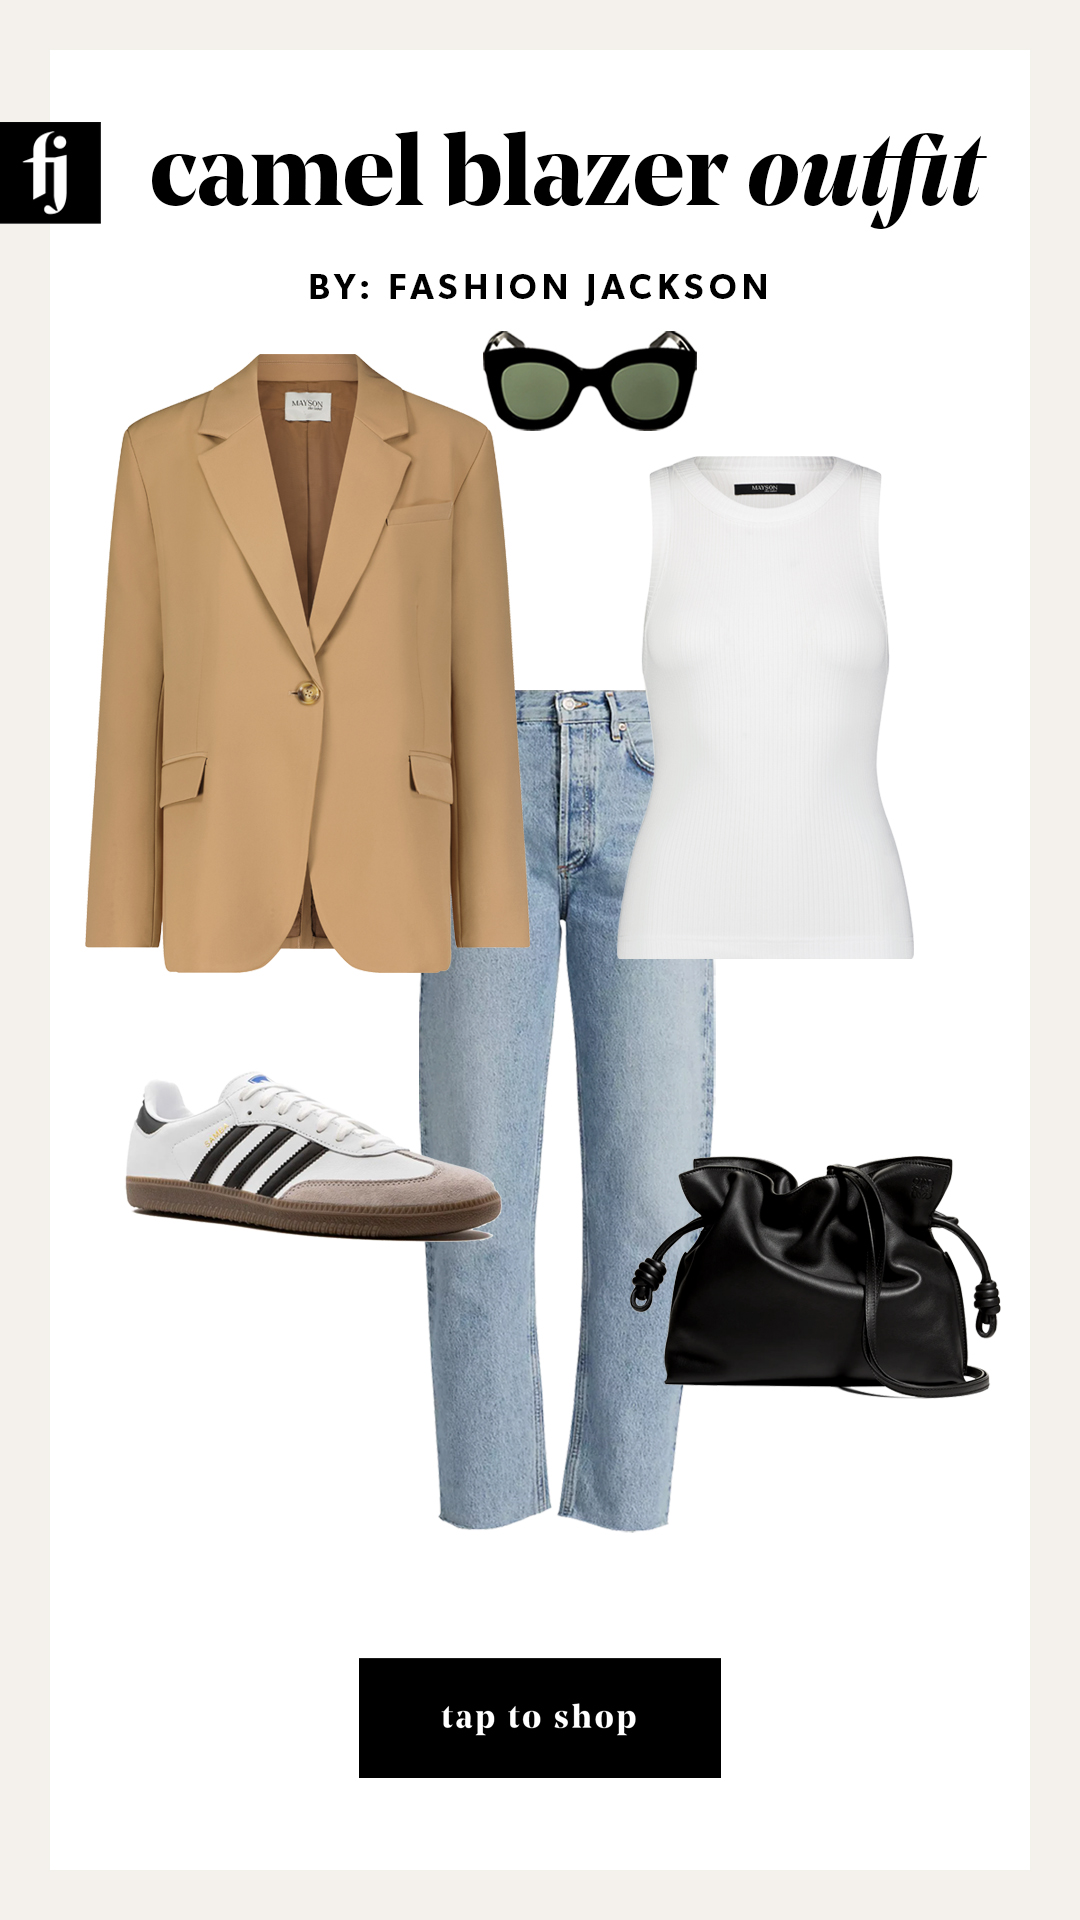 camel blazer outfit idea with jeans and sneakers